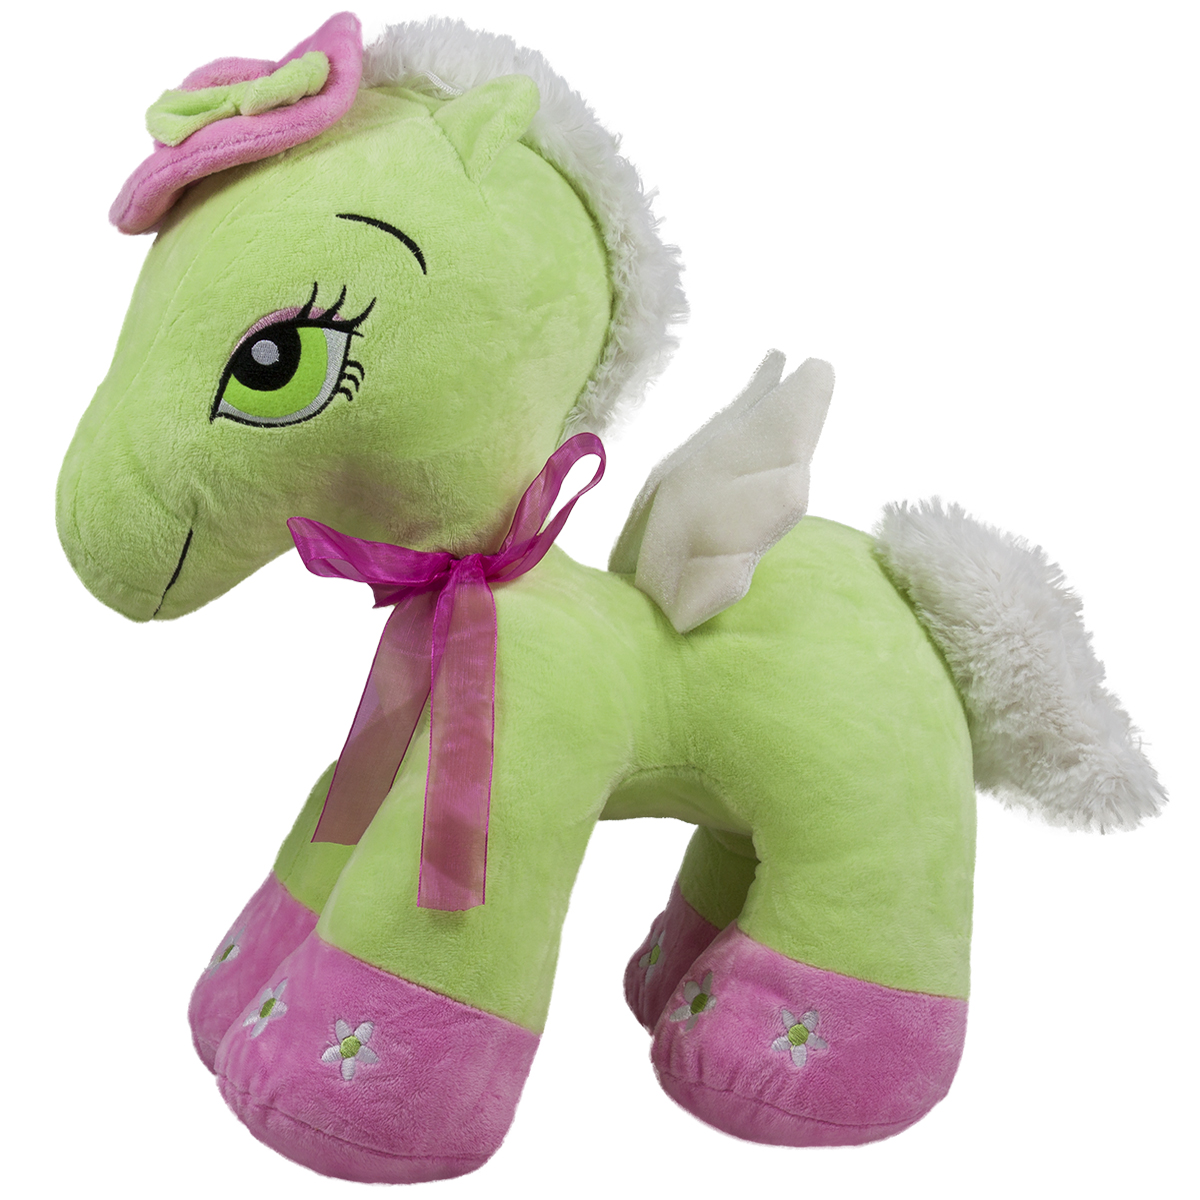 Unicorn with accessories - Green